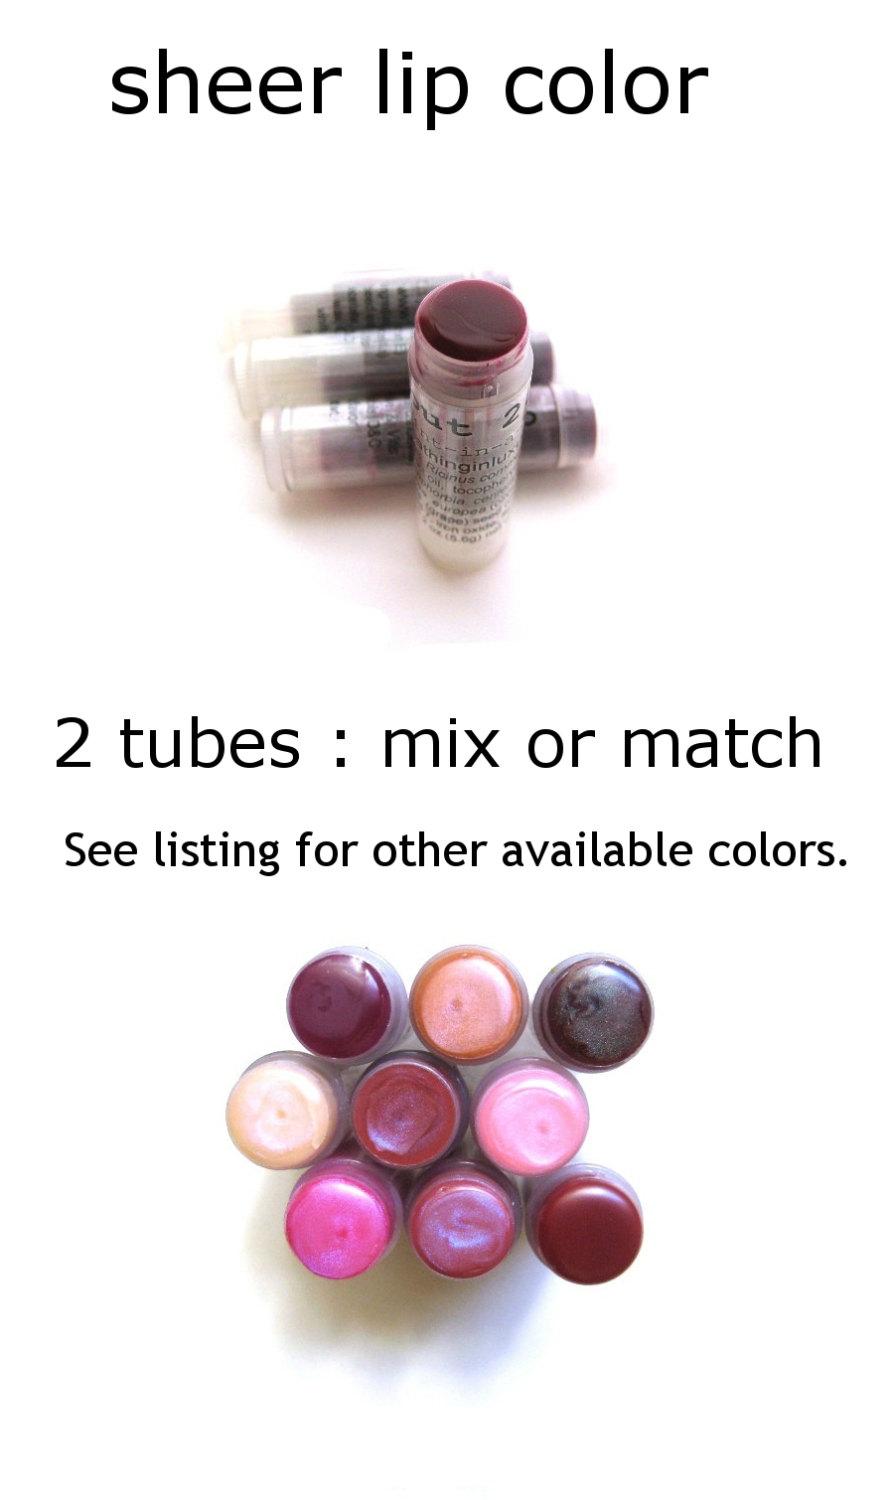 Hochzeit - Lip Tint 2 Blackberry Lip Tint lip balm Sheer Lip Color Natural sunkiss look any 2 lip tints Mix or Match girlfriend gift for her wife gift